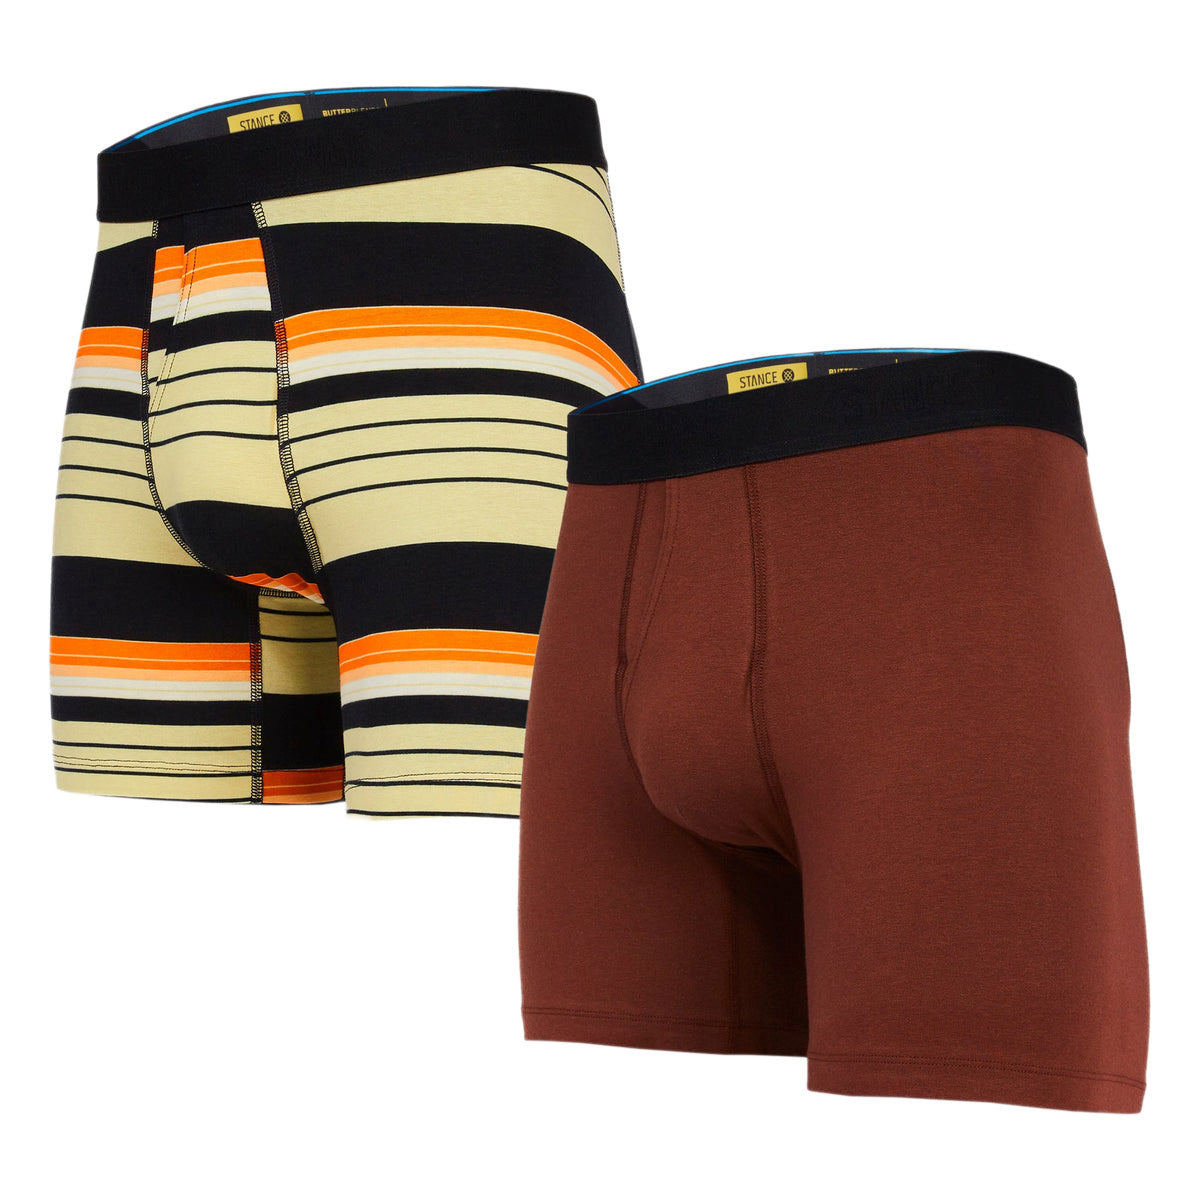 Stance Basically 2 Pack Boxer Brief - Multi image 1